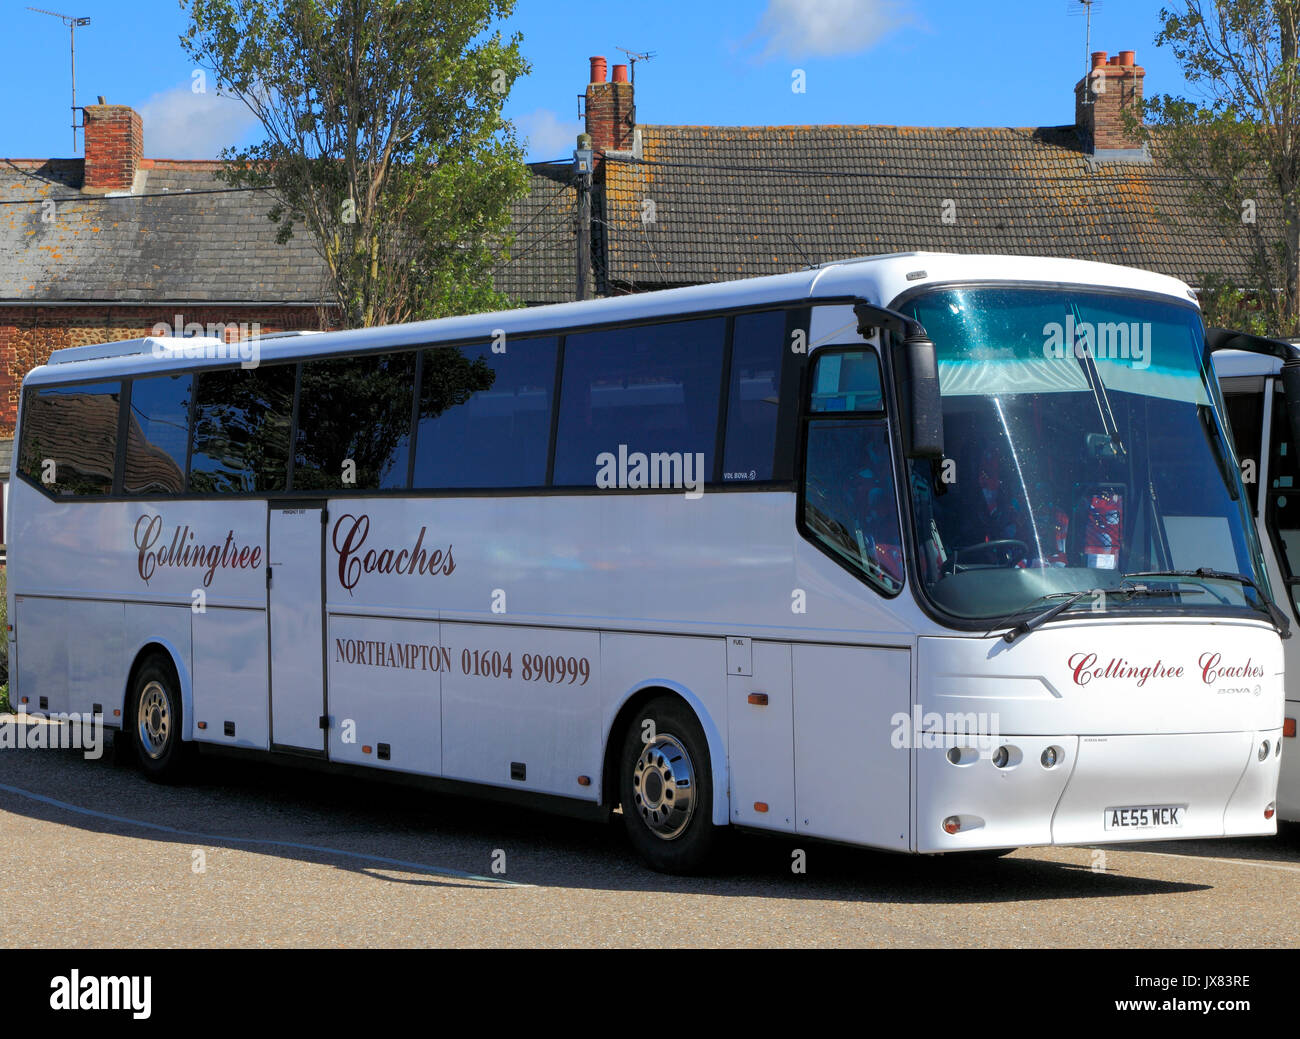 Collingtree Coaches, coach, day trips, trips, excursion, excursions, travel, company, companies, transport, England, UK Stock Photo